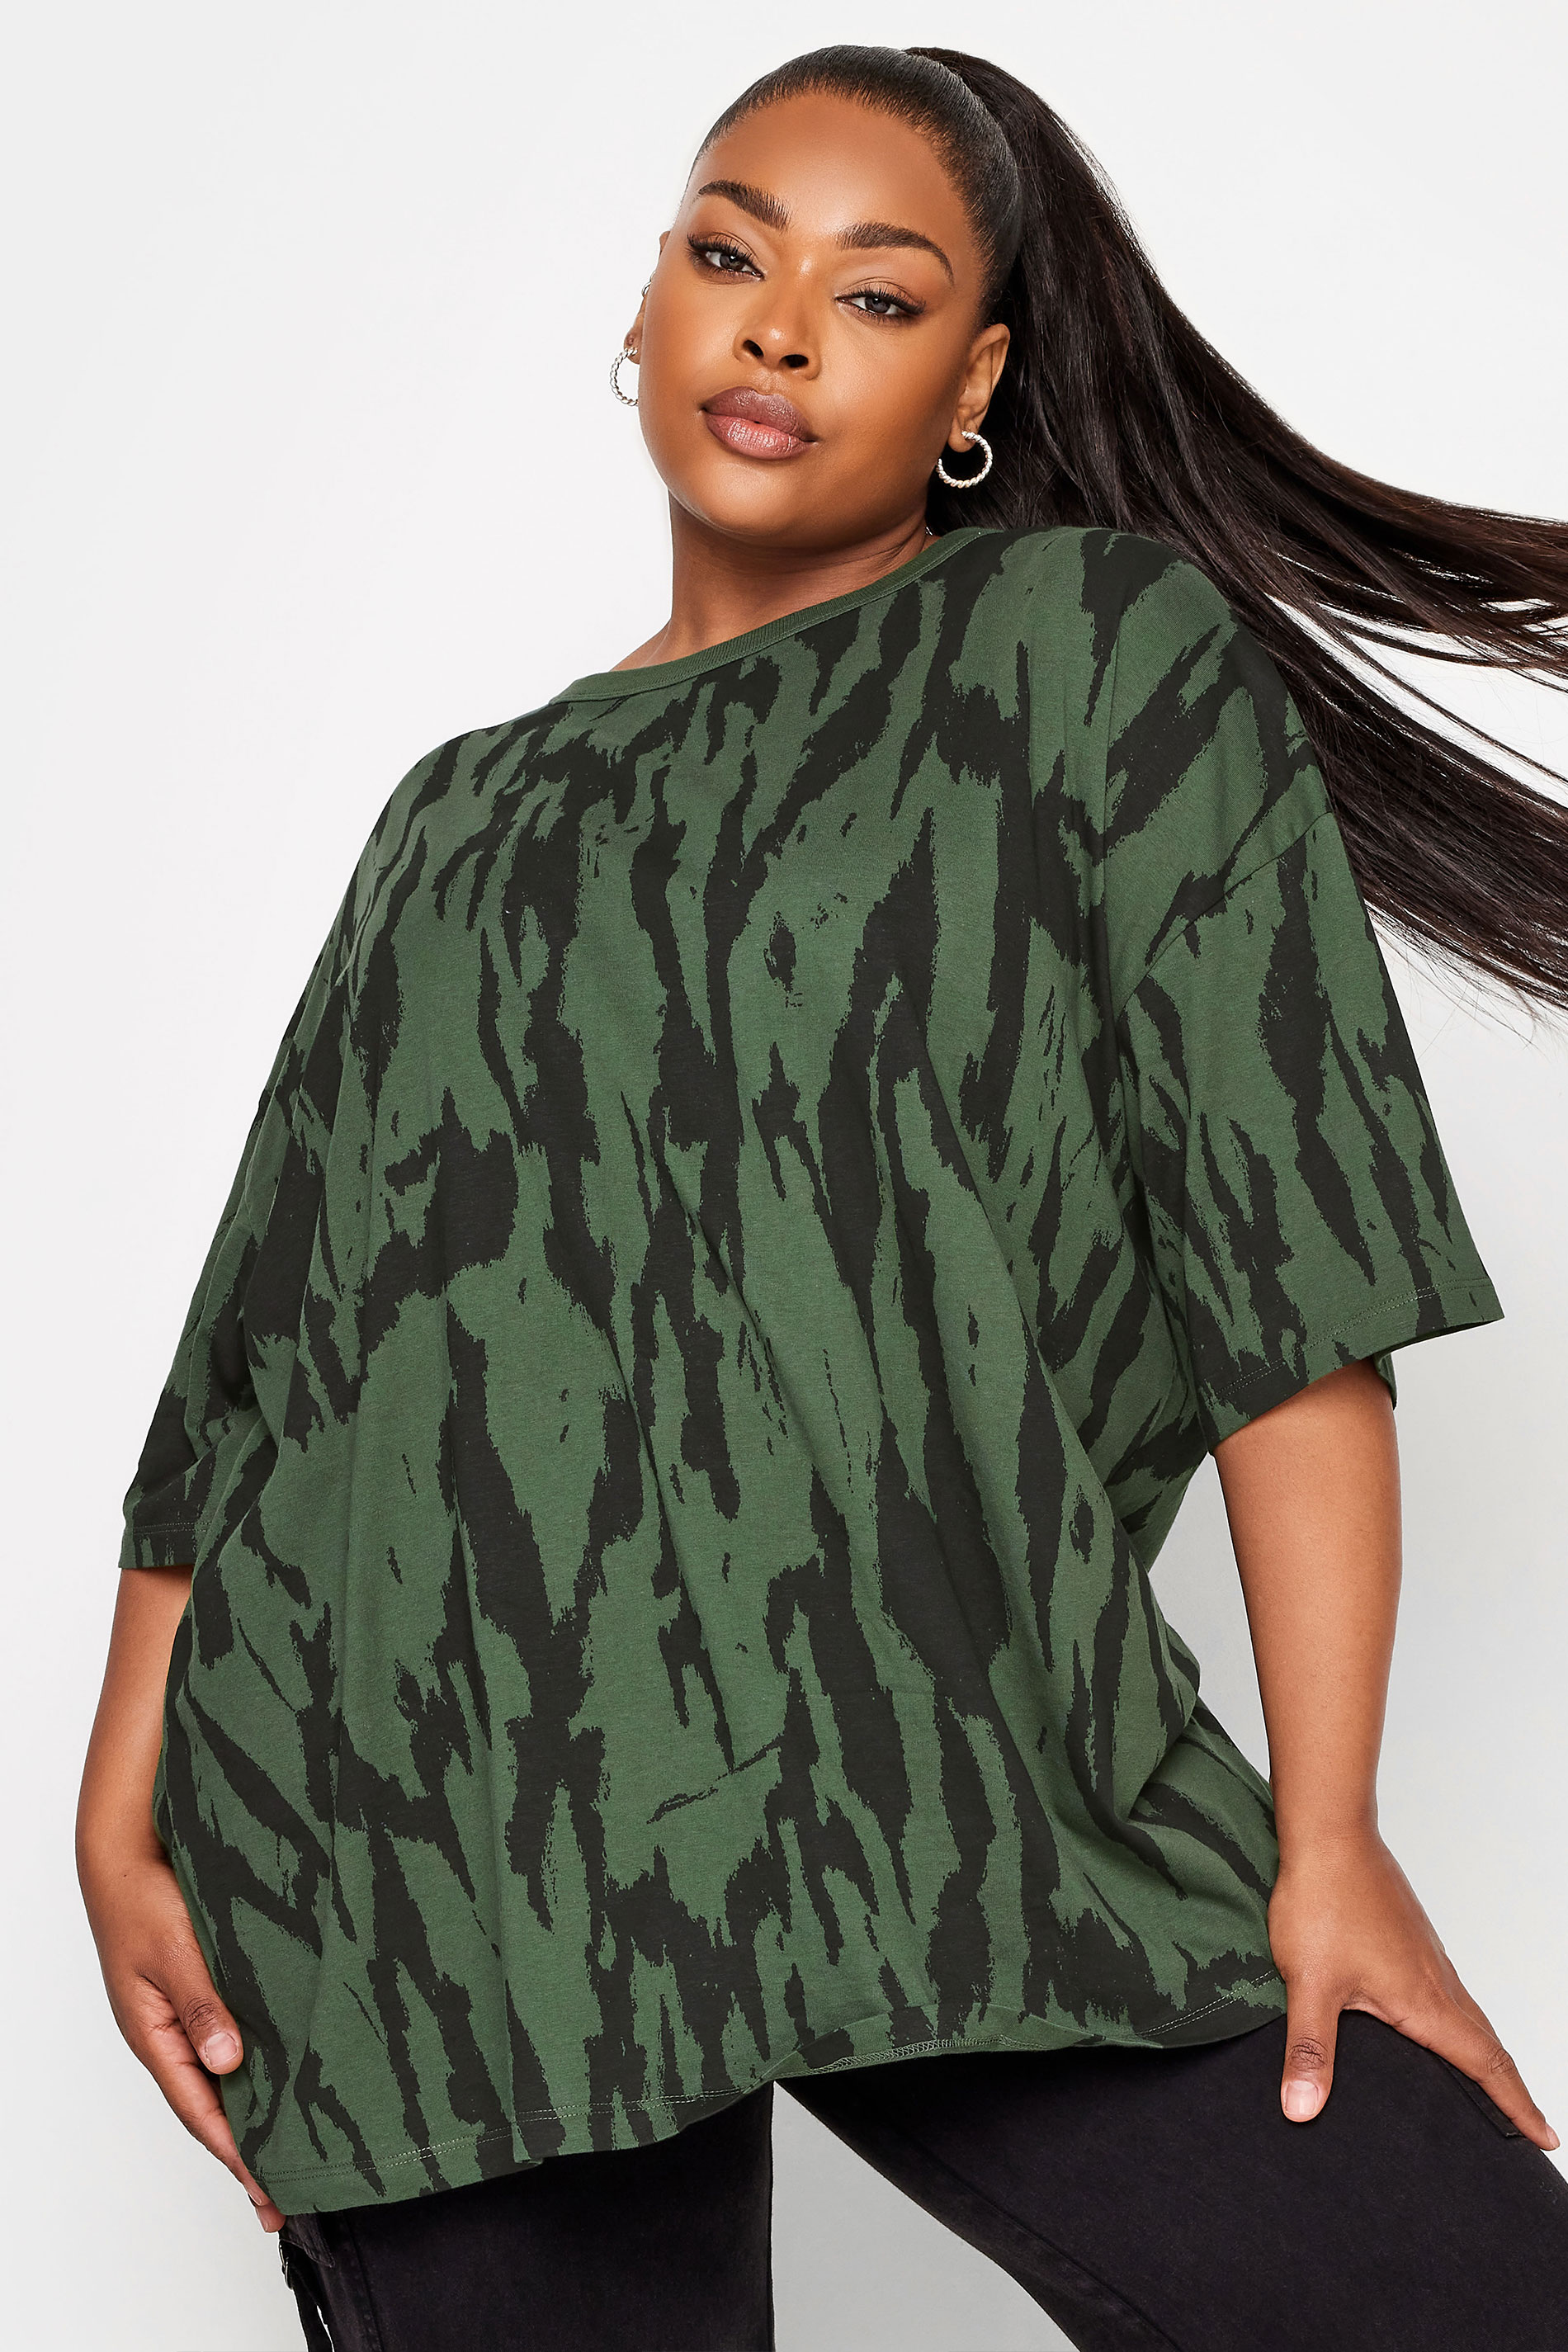 YOURS 2 PACK Plus Size Khaki Green & Black Animal Print T-Shirts | Yours Clothing 2